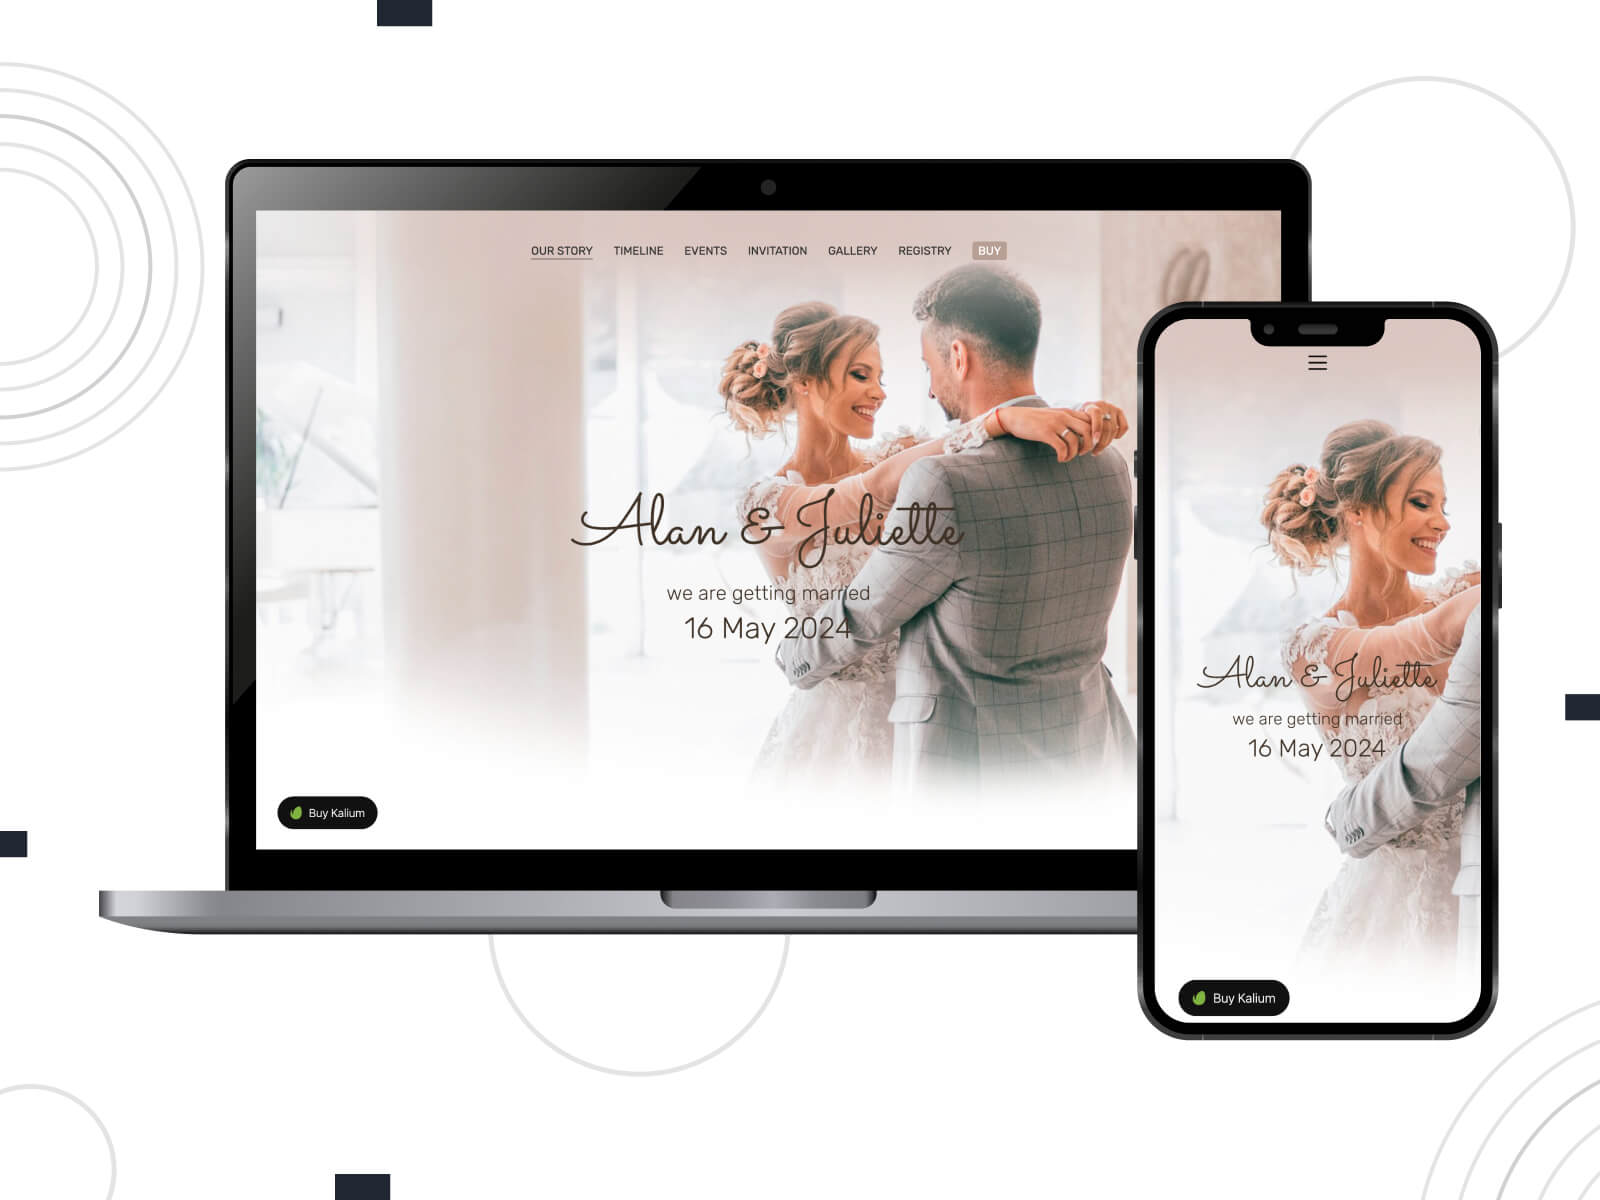 Picture of Kalium - luminous, warm, a romantic theme on WordPress for wedding sites, complete with love story timelines and photo galleries in dim gray, gray, and indian red color scheme.